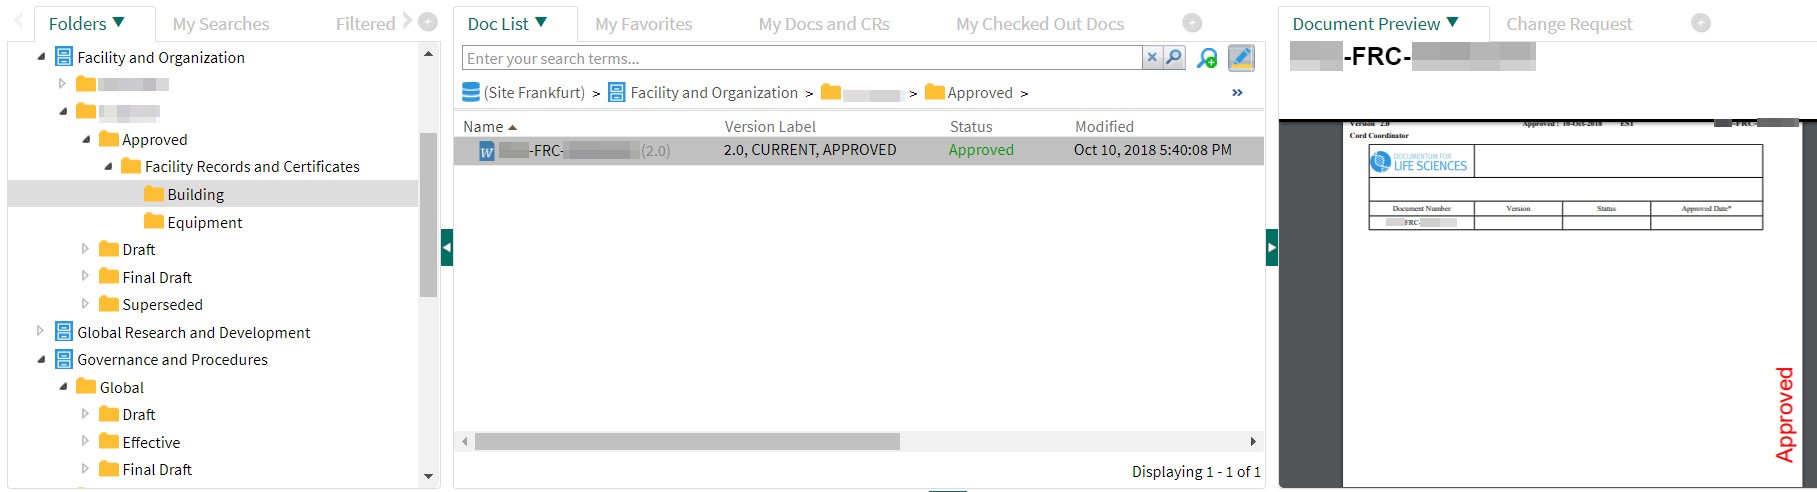 OpenText Documentum for Life Sciences_document is approved and presented accordingly